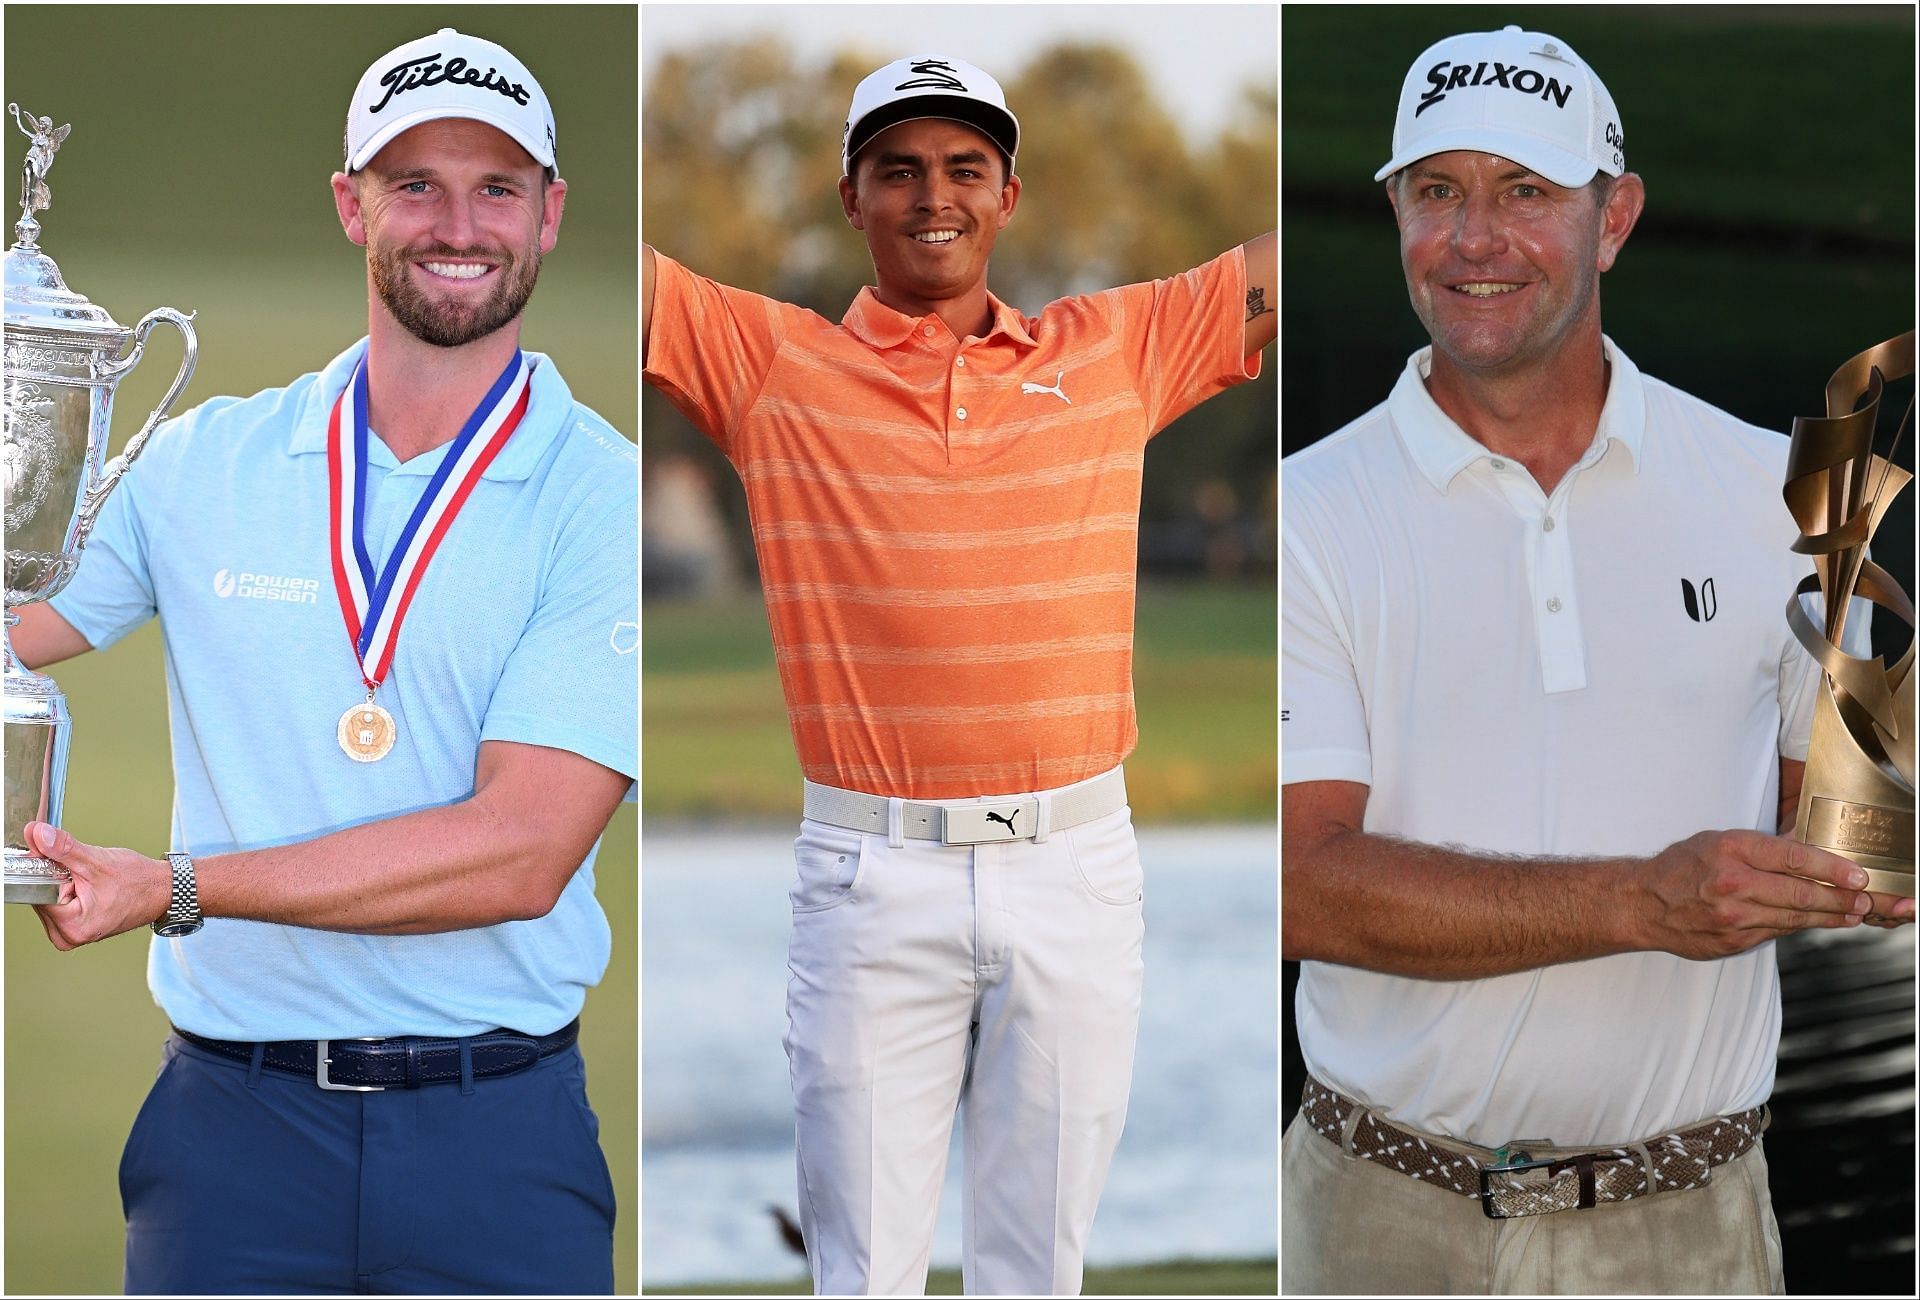 Wyndham Clark, Rickie Fowler, and Lucas Glover (via Getty Images)